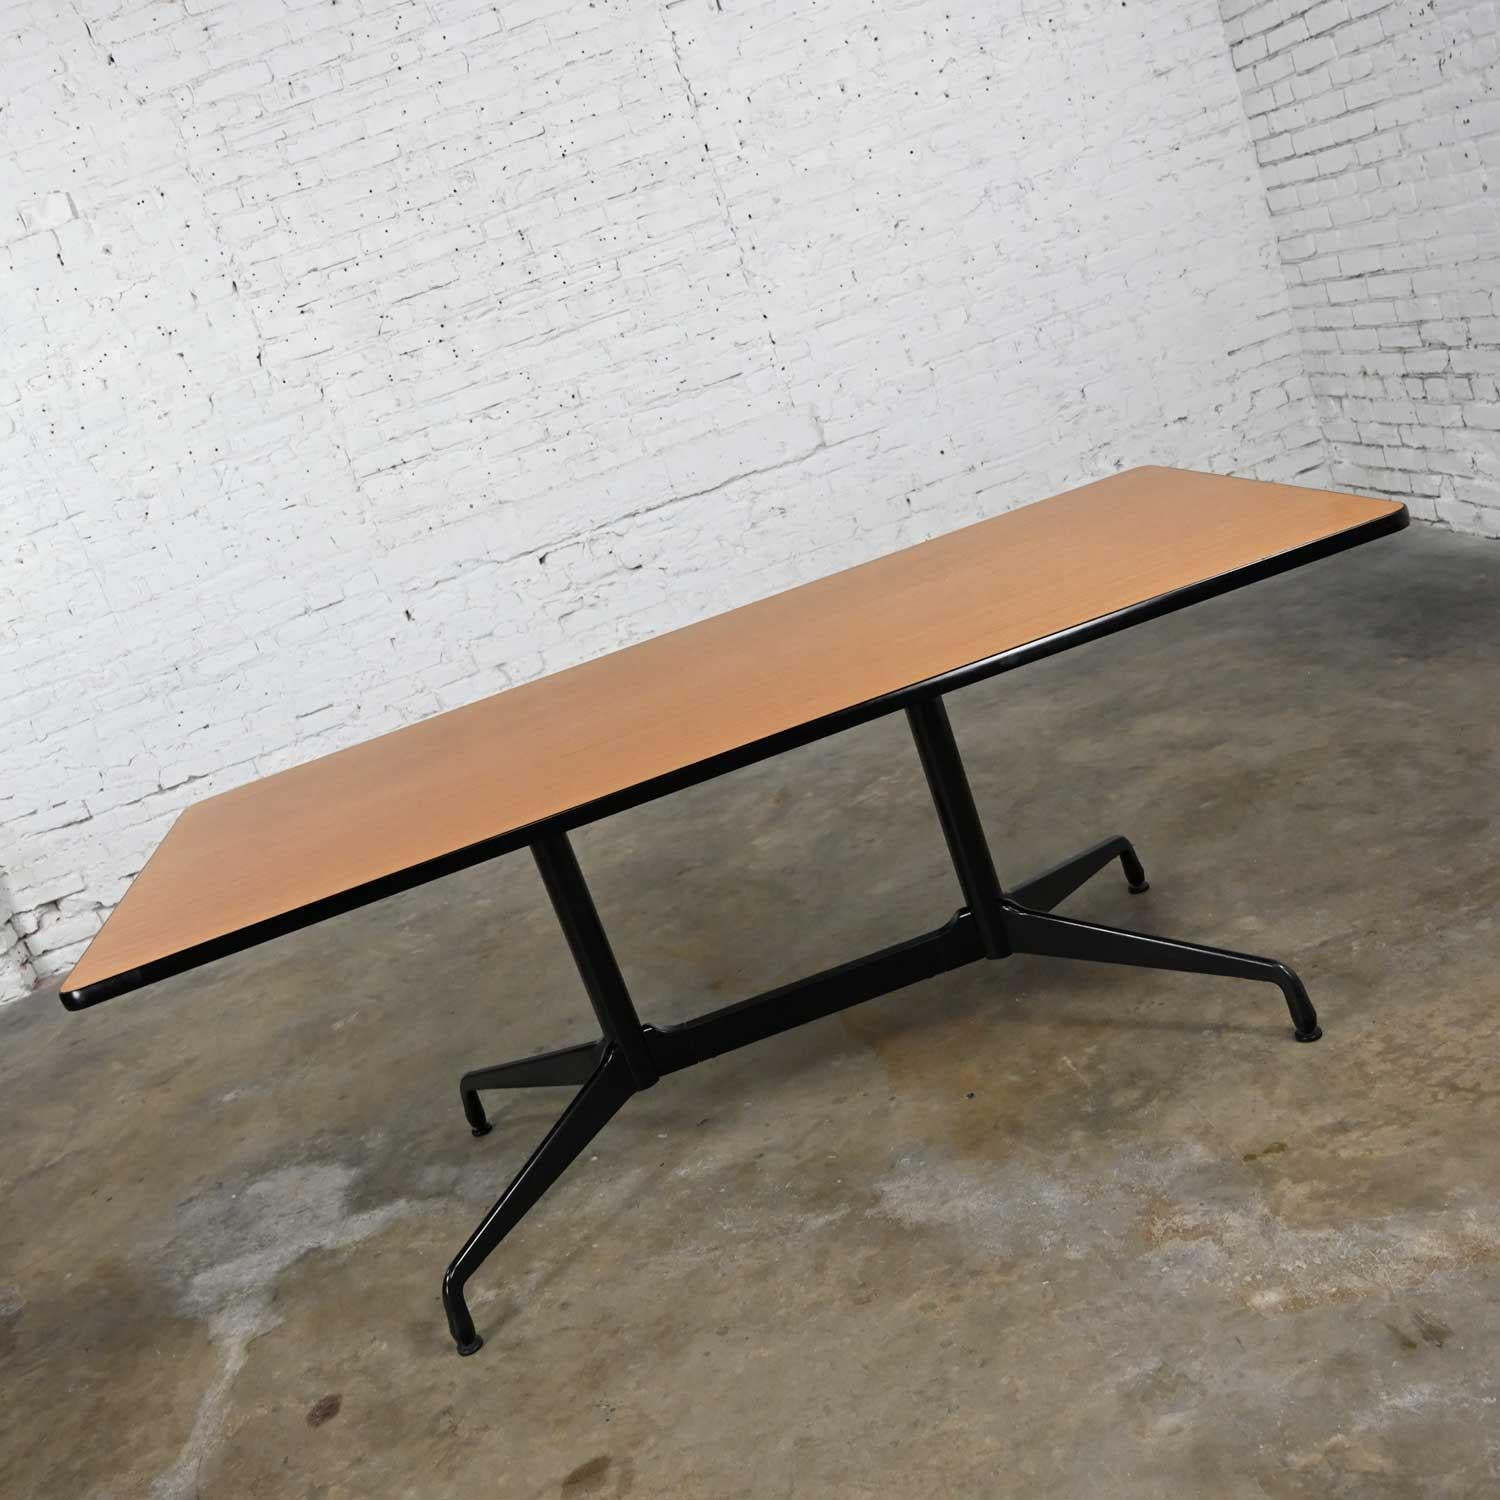 Classic Eames for Herman Miller segmented base table with black base and table edge, rectangular natural oak wood veneer top, and aluminum spider attachment. Beautiful condition, keeping in mind that this is not new so will have signs of use and